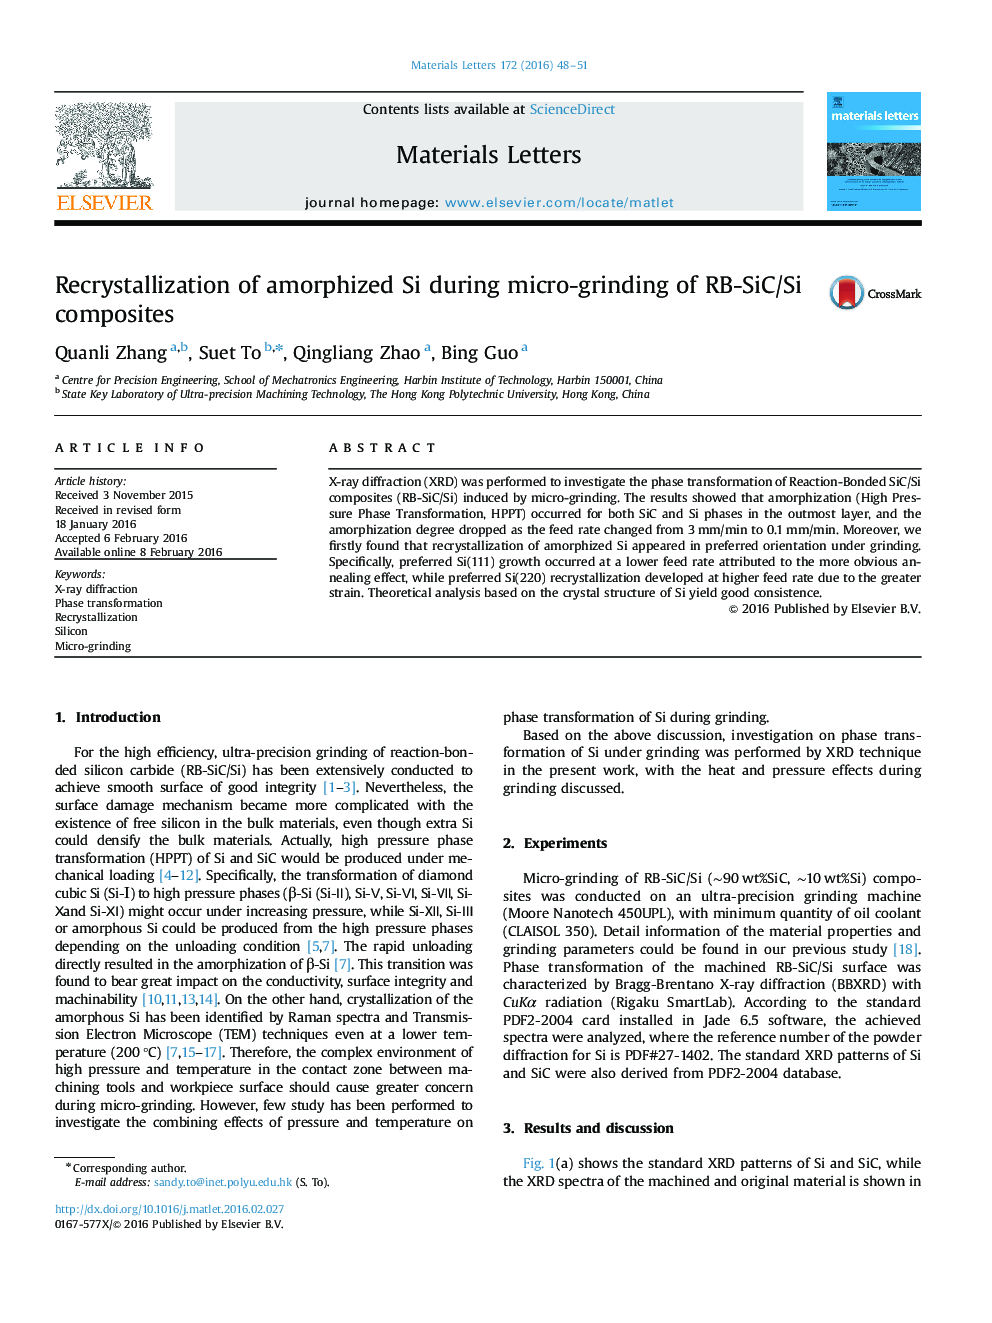 Recrystallization of amorphized Si during micro-grinding of RB-SiC/Si composites